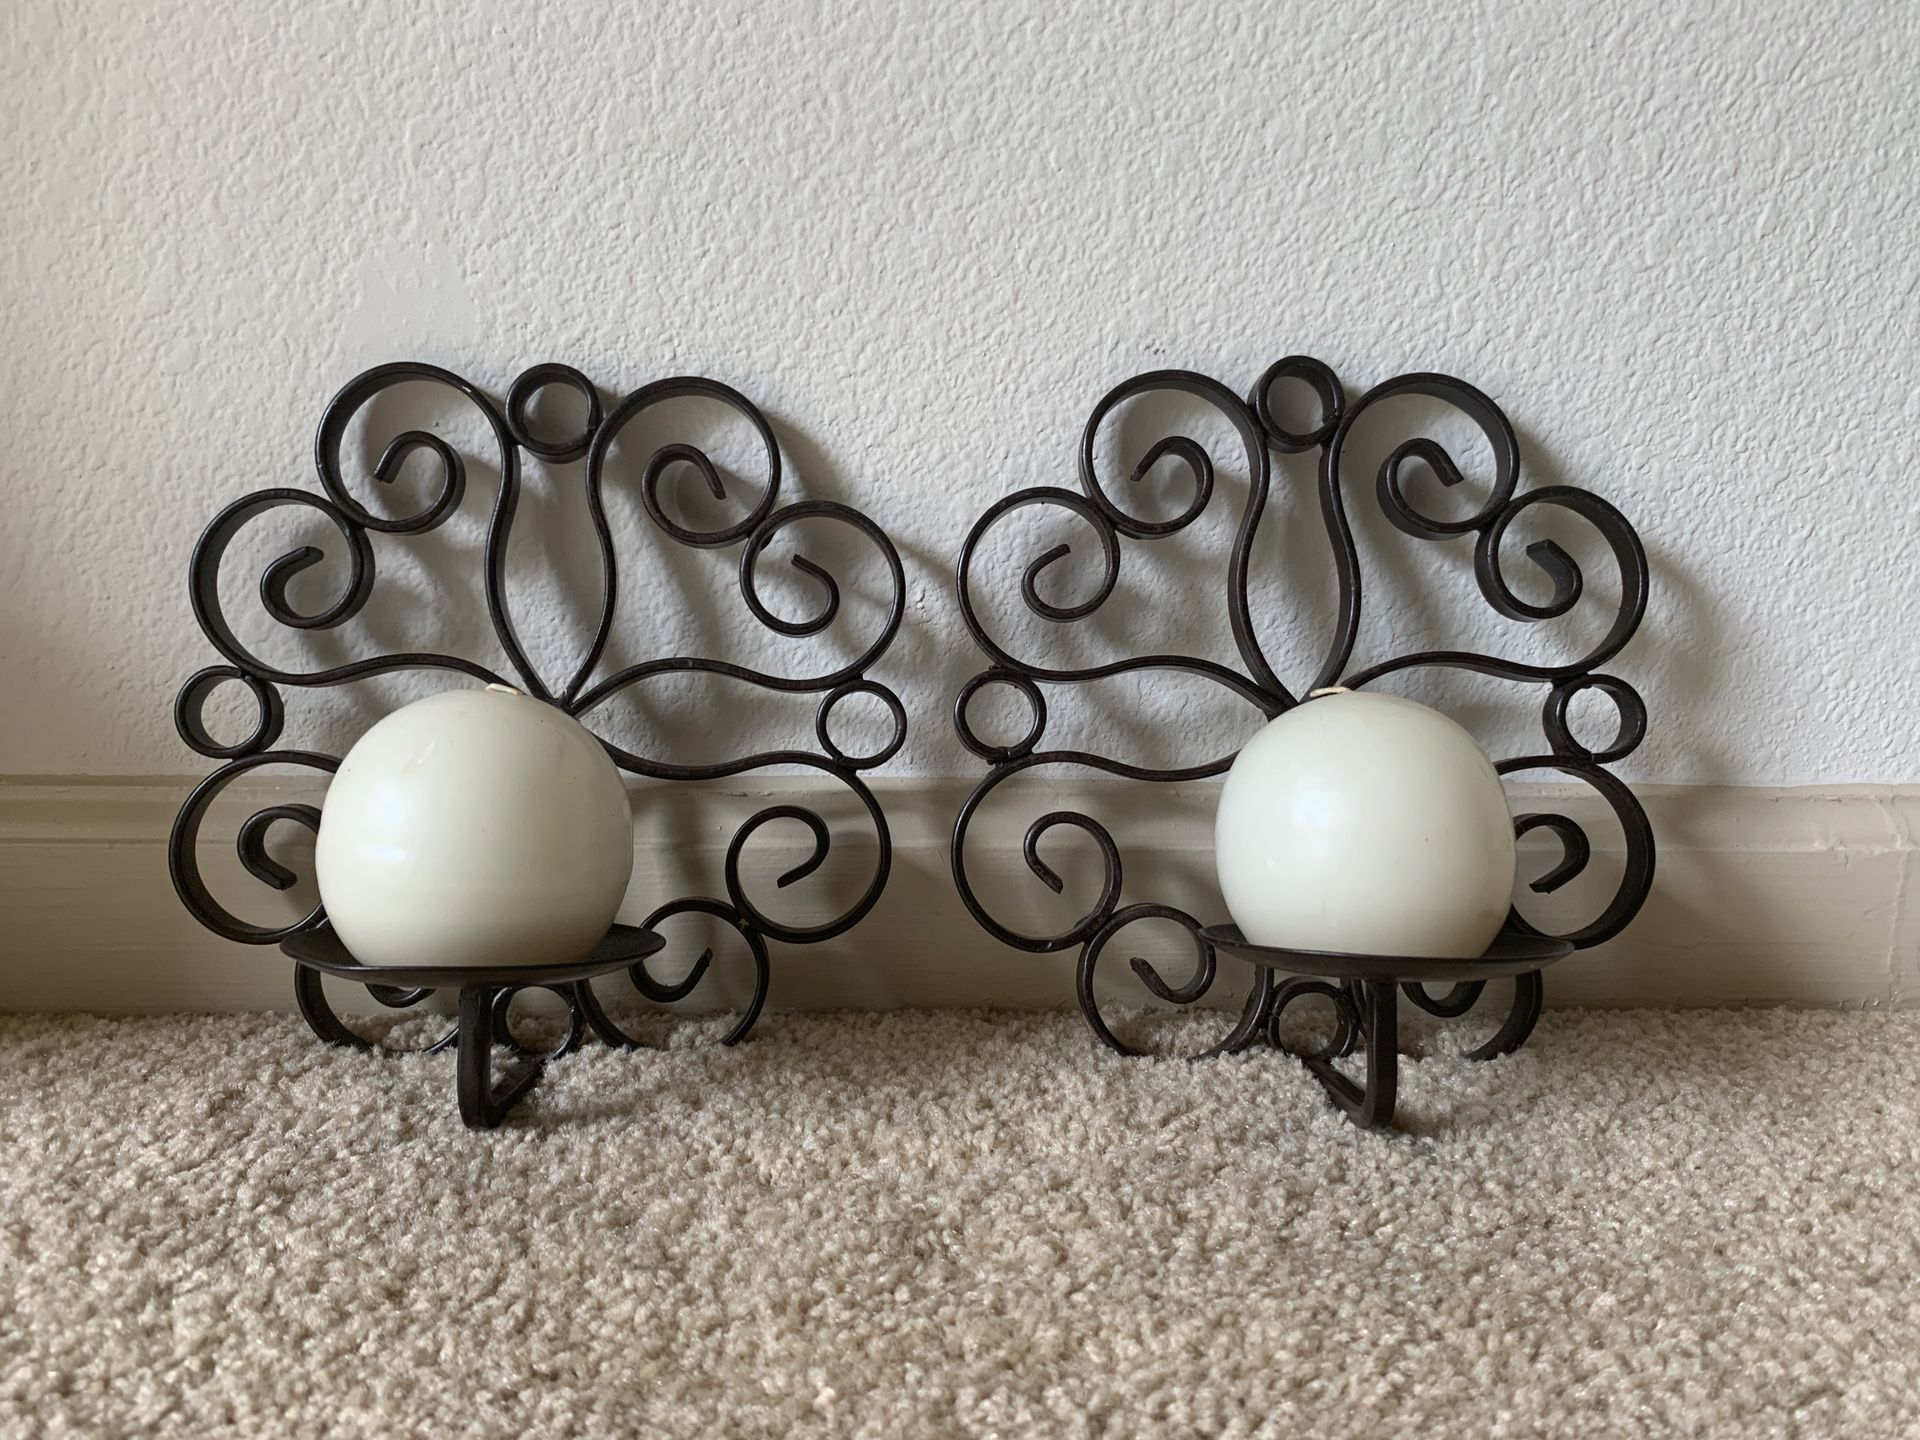 Excellent condition pair of sconce